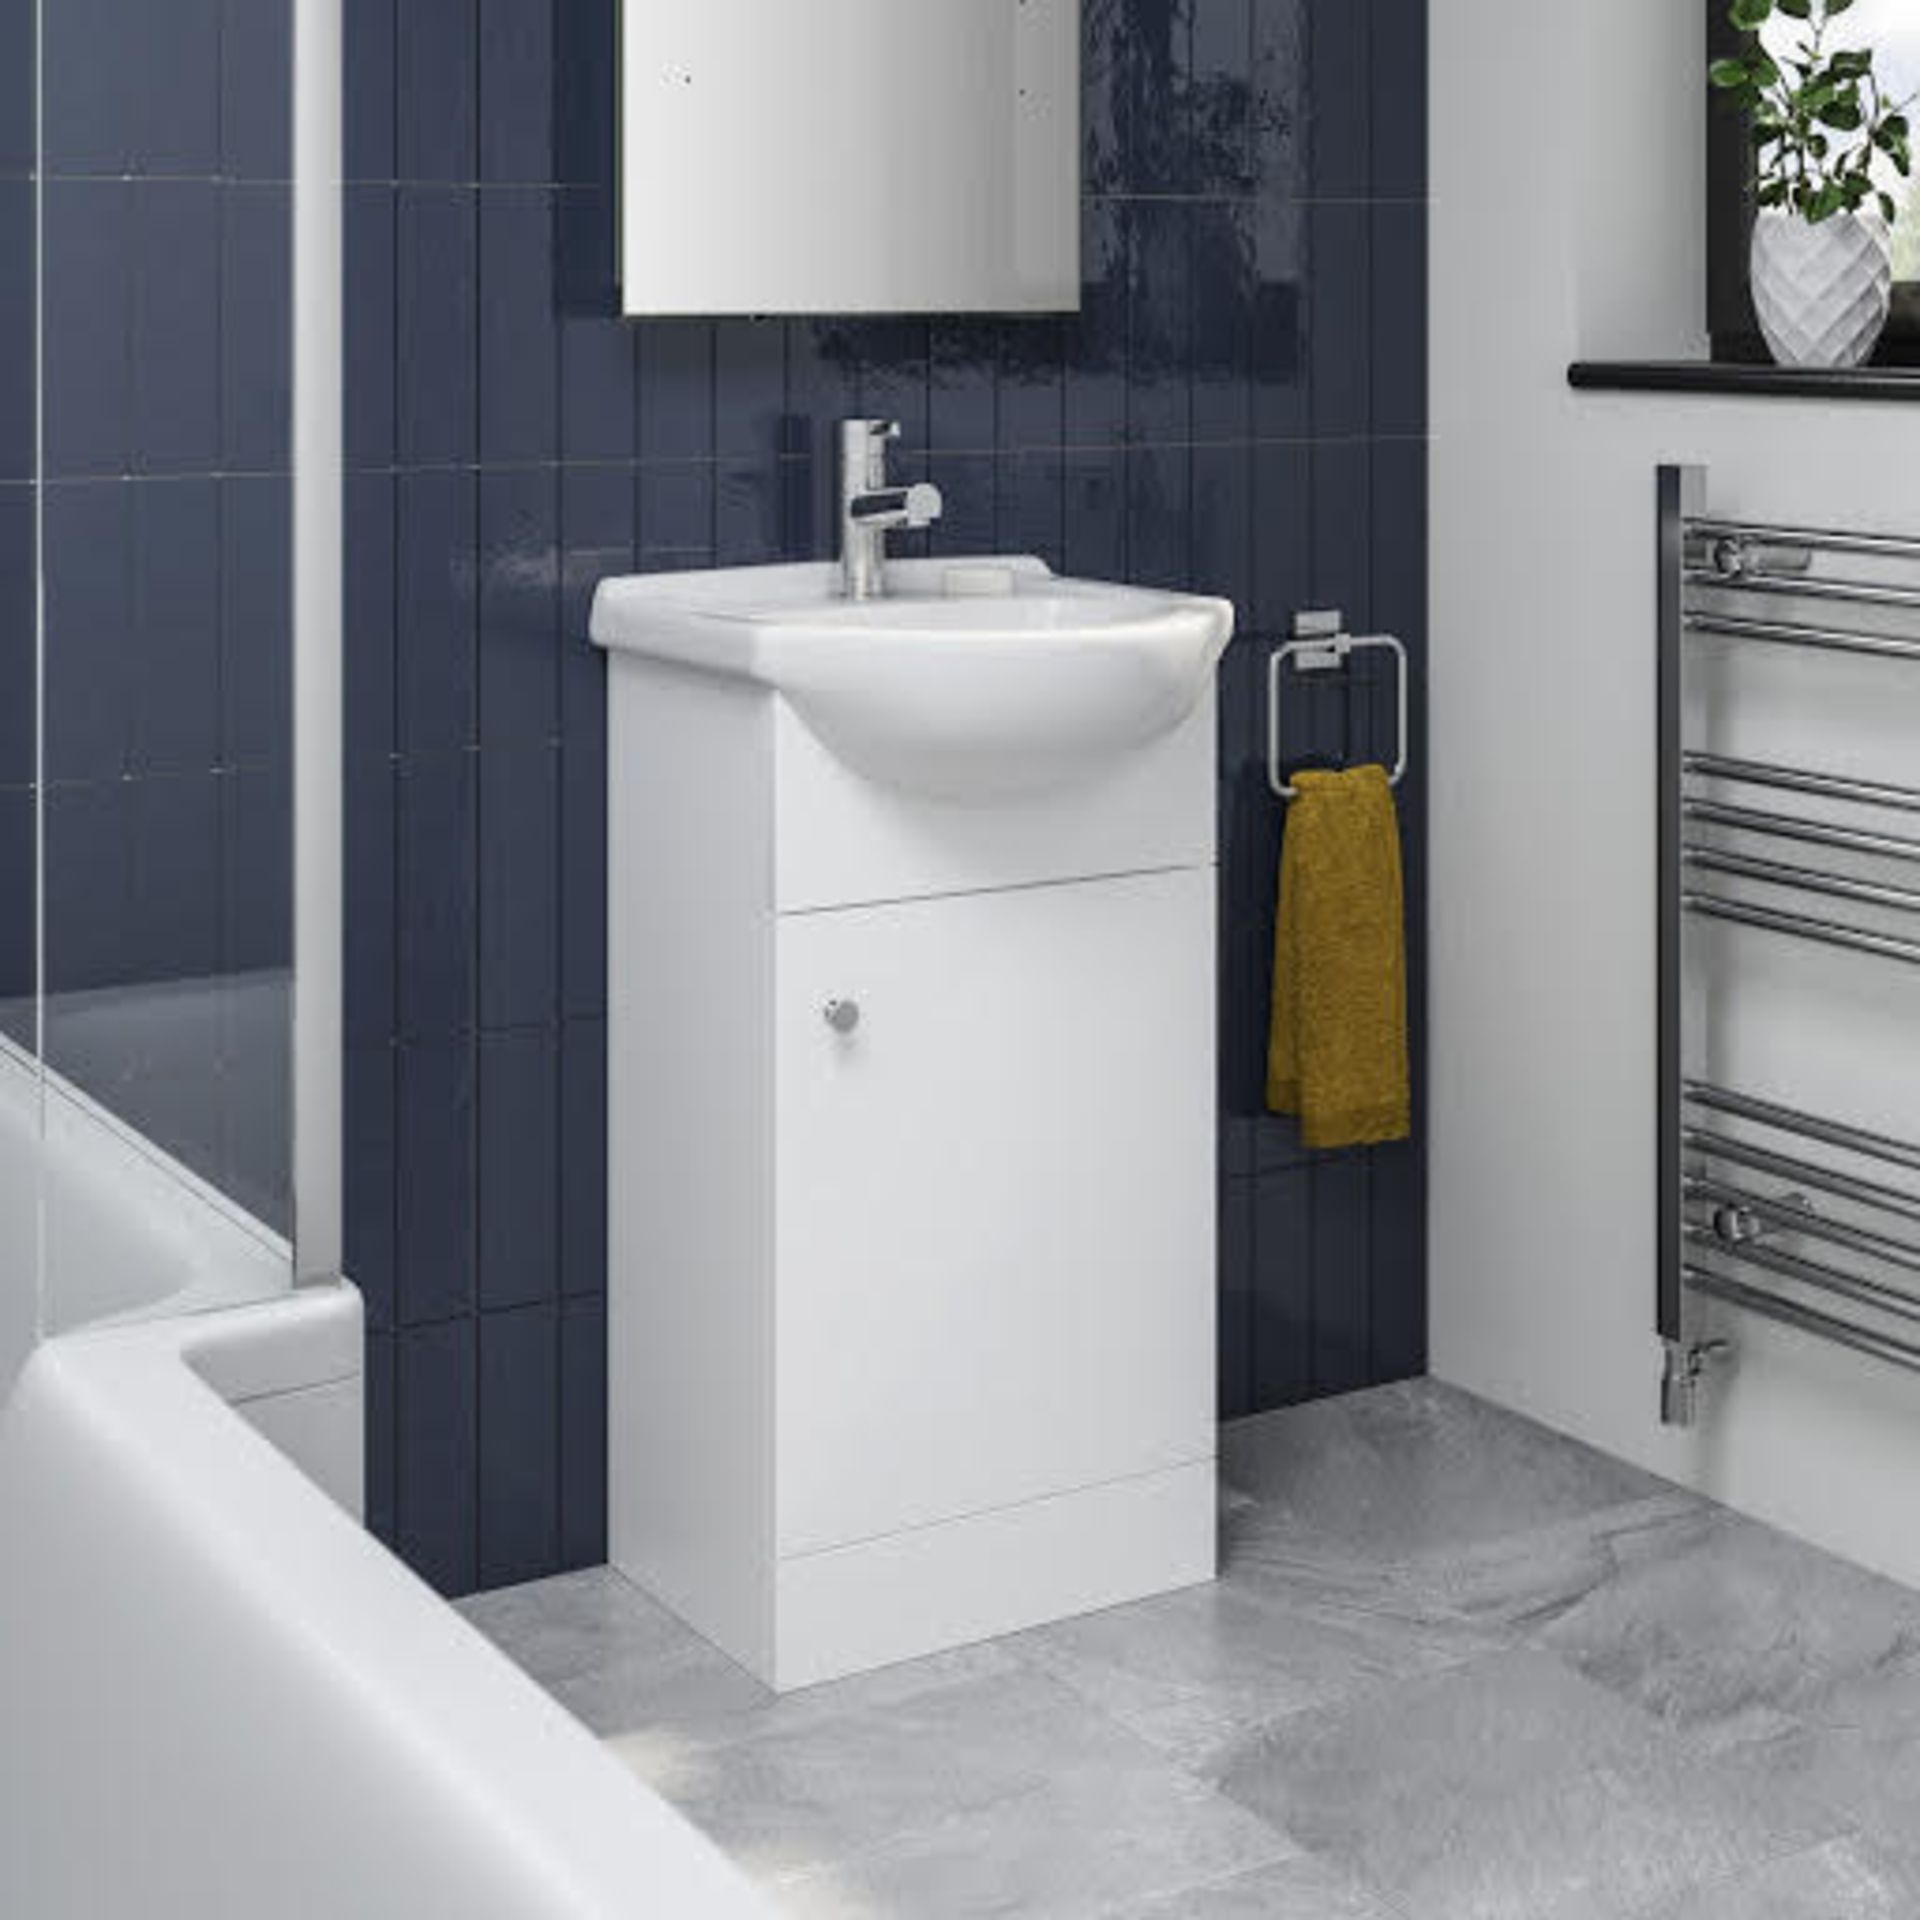 NEW & BOXED 410mm Quartz White Basin Vanity Unit- Floor Standing. RRP £299.99.Comes complete with